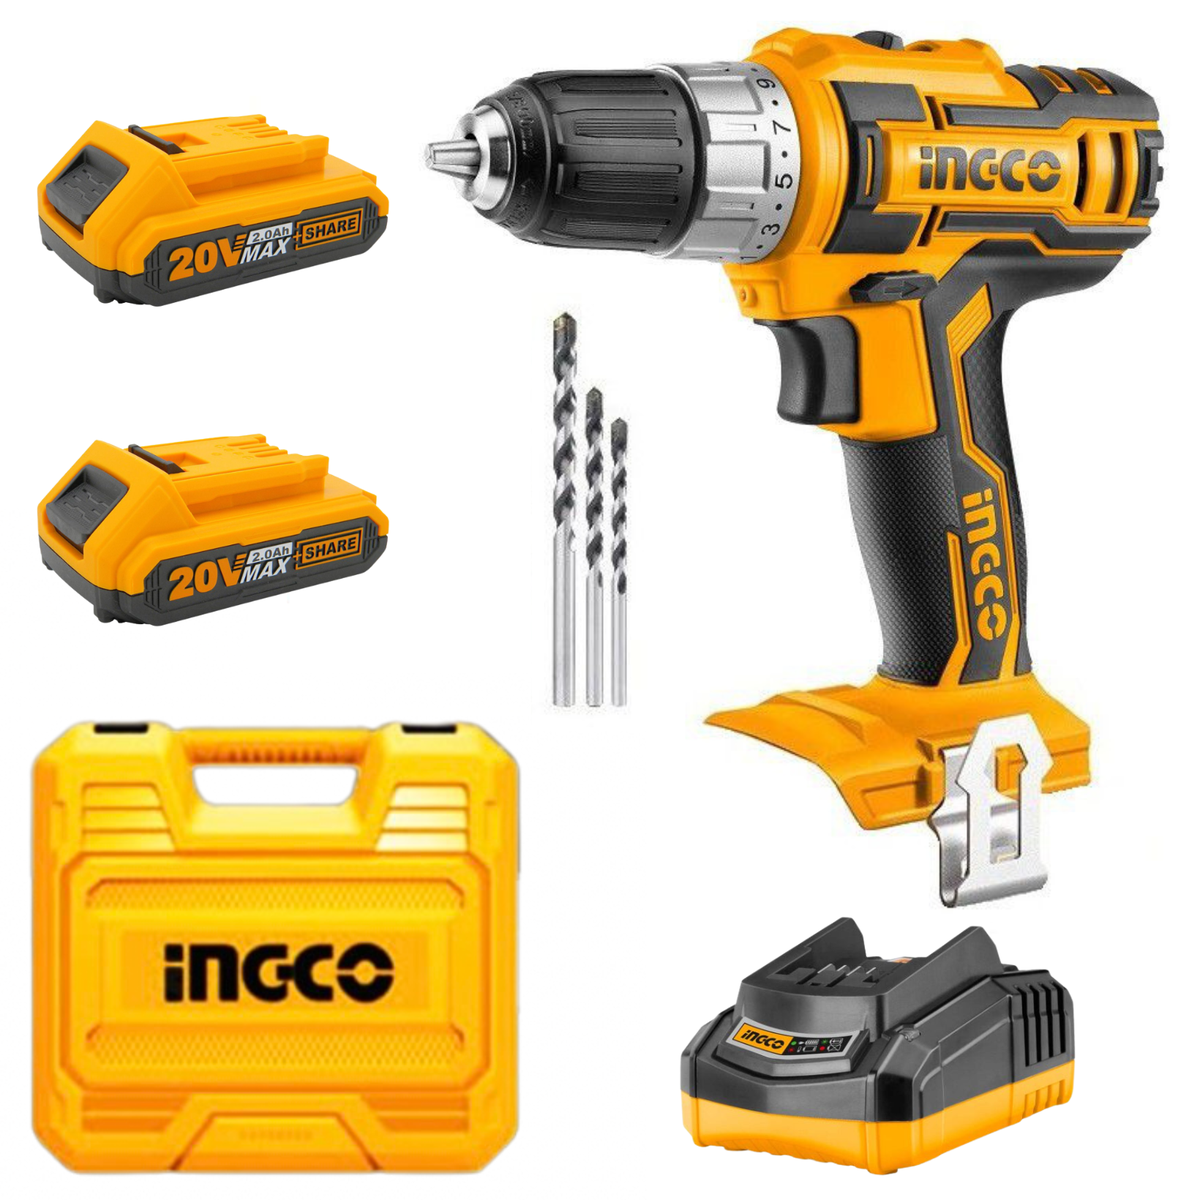 Ingco Cordless Impact Drill Li-Ion 20V with Carry Case Kit